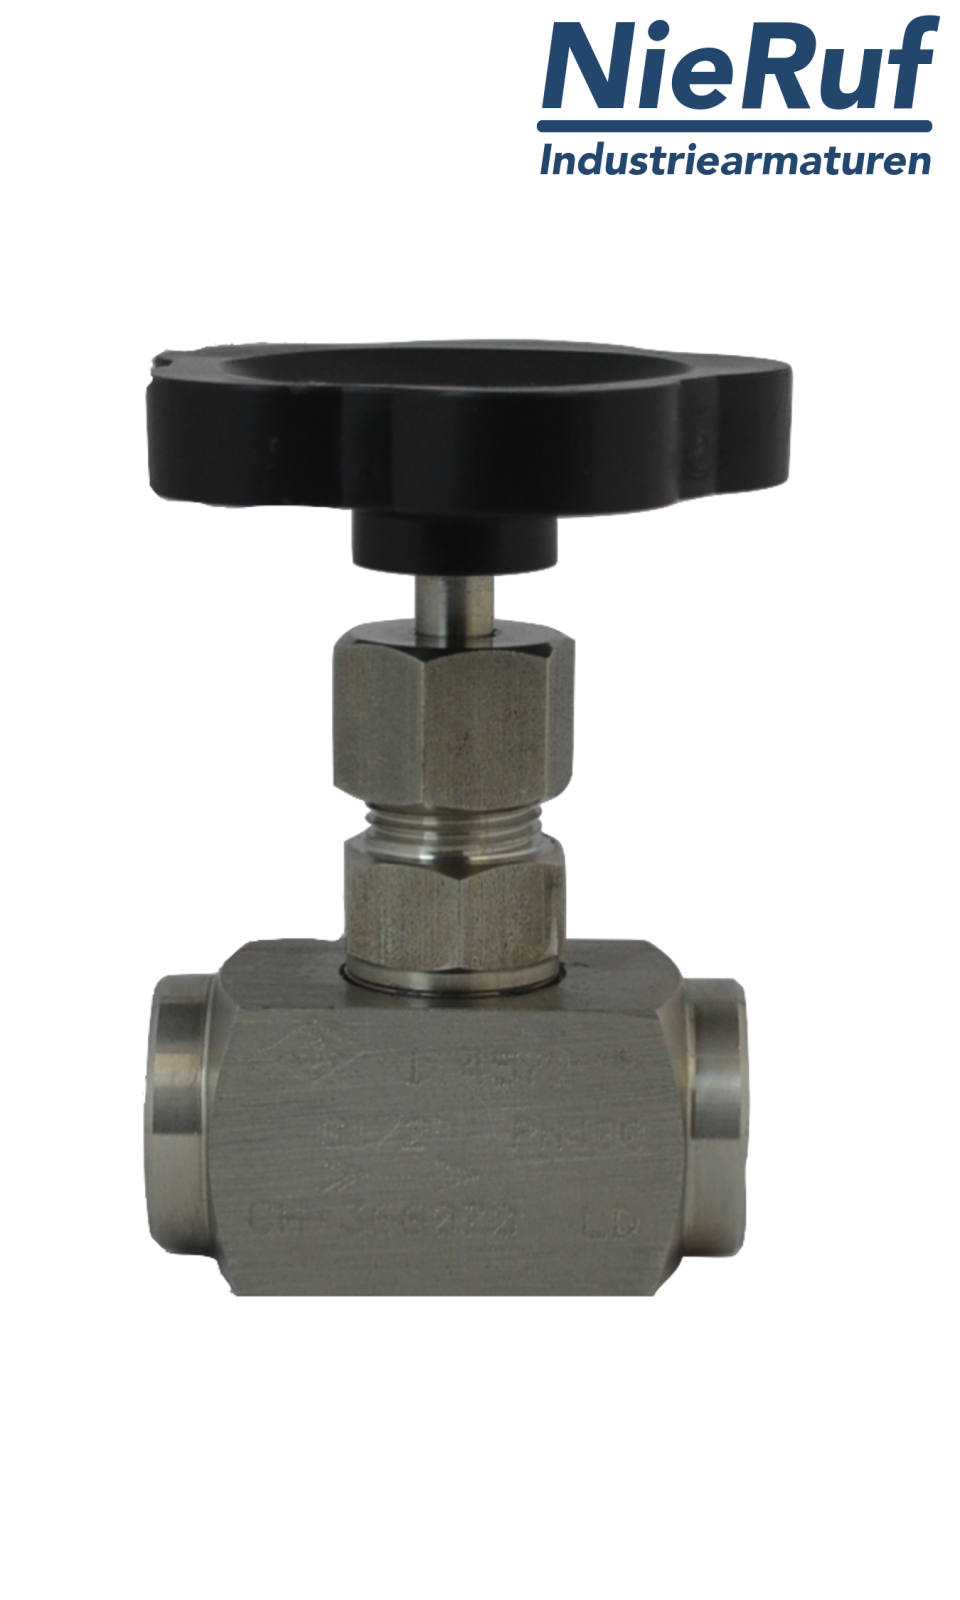 high pressure needle valve  2" inch NV01 stainless steel 1.4571